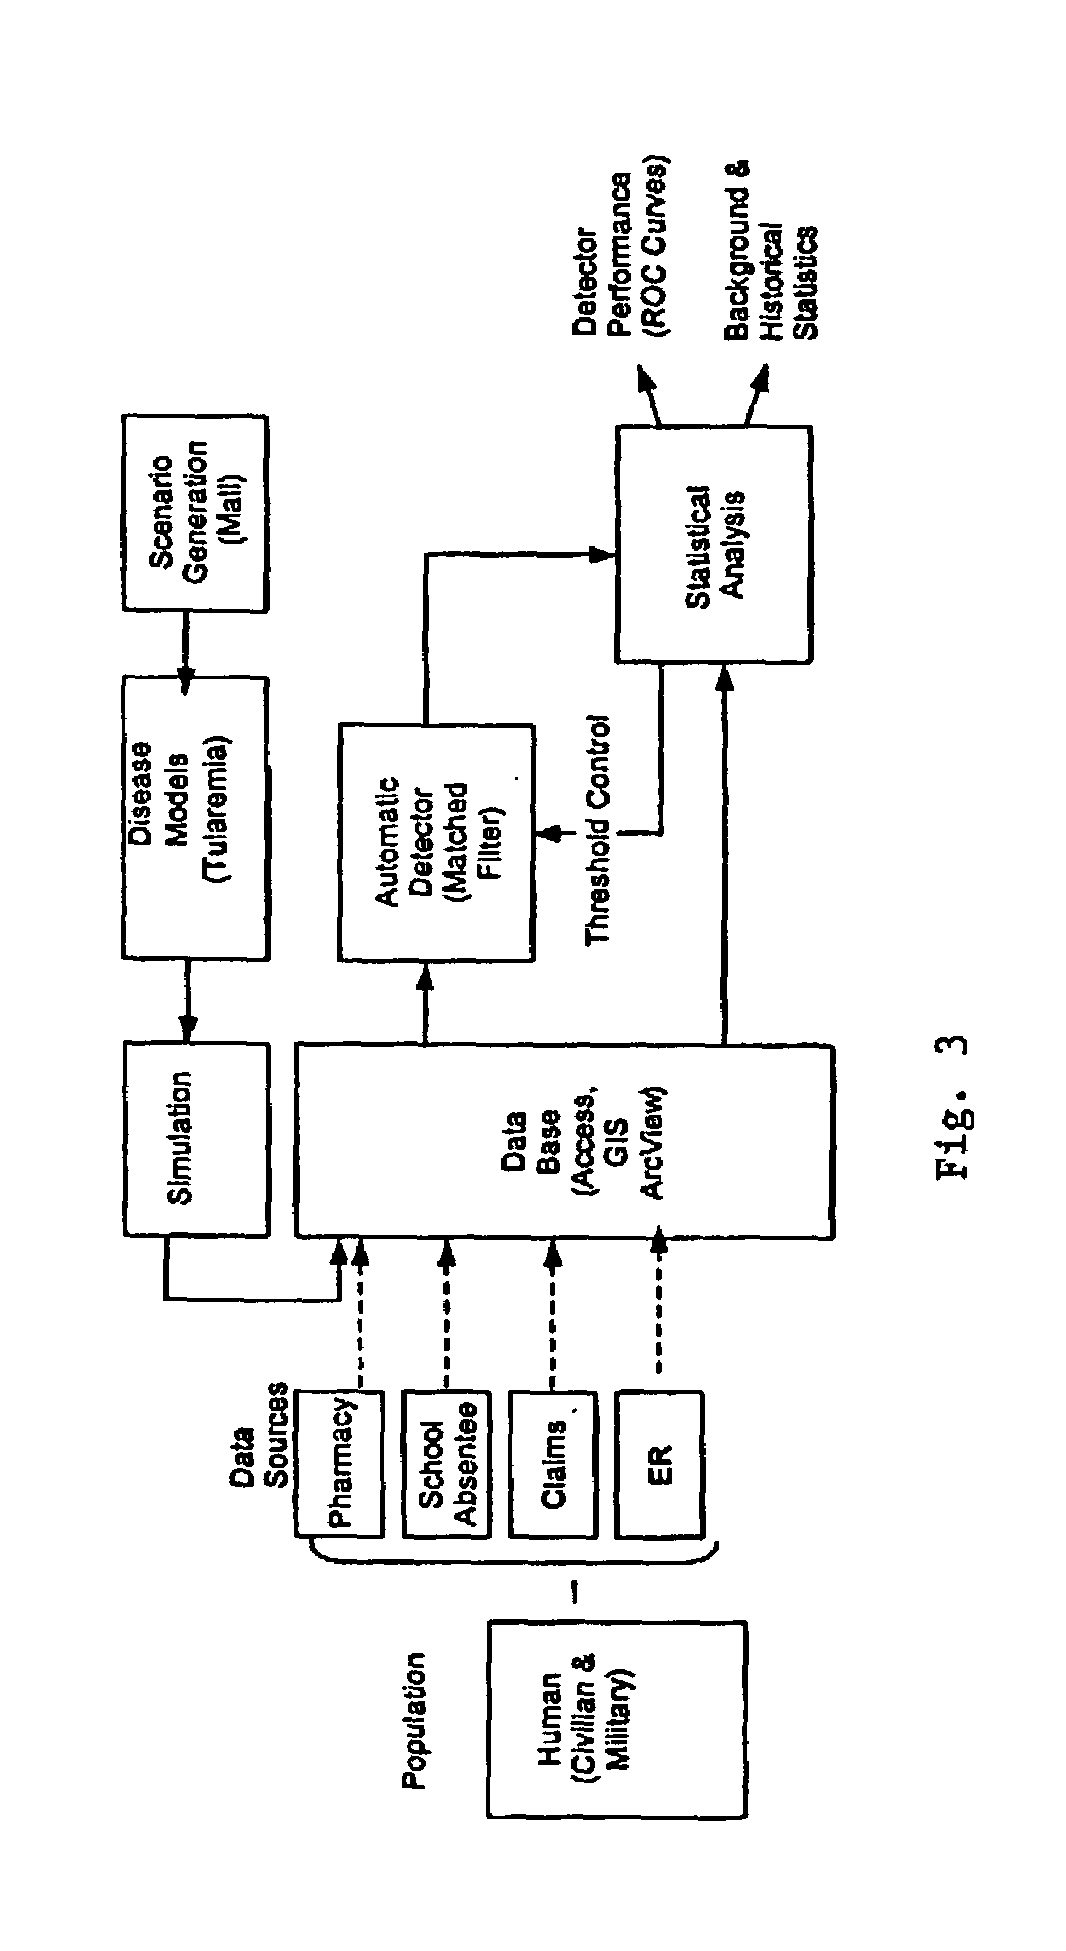 Method and system for bio-surveillance detection and alerting